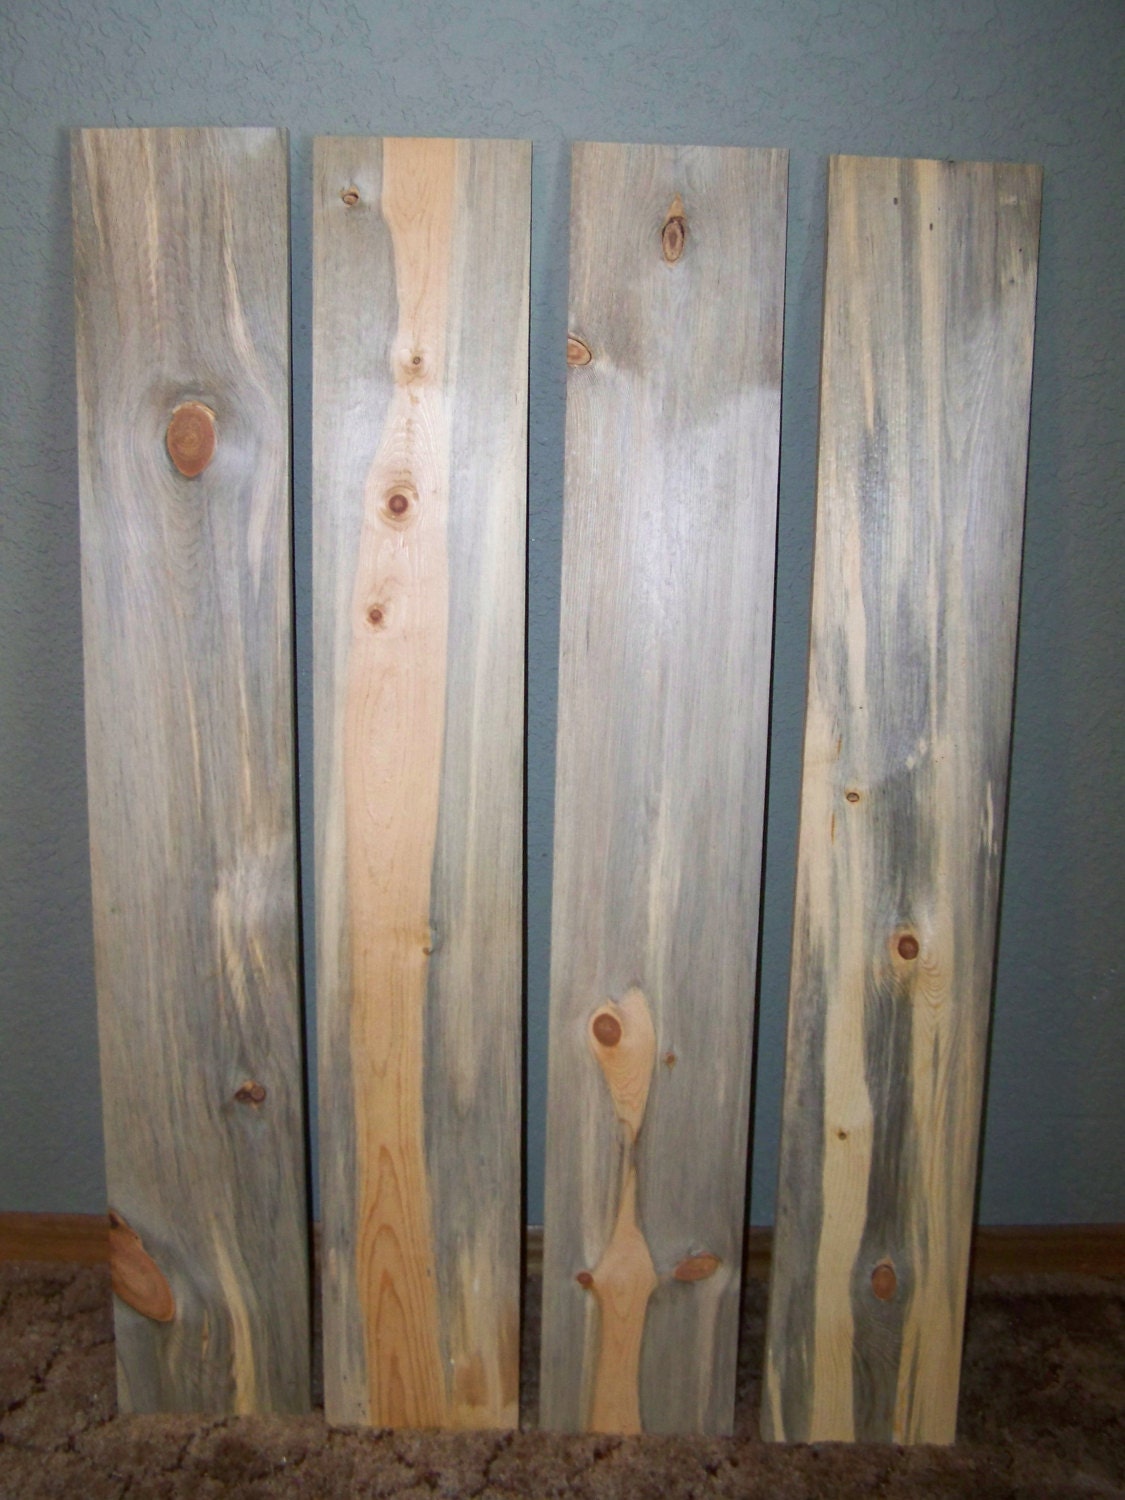 Rough cut pine boards for sale